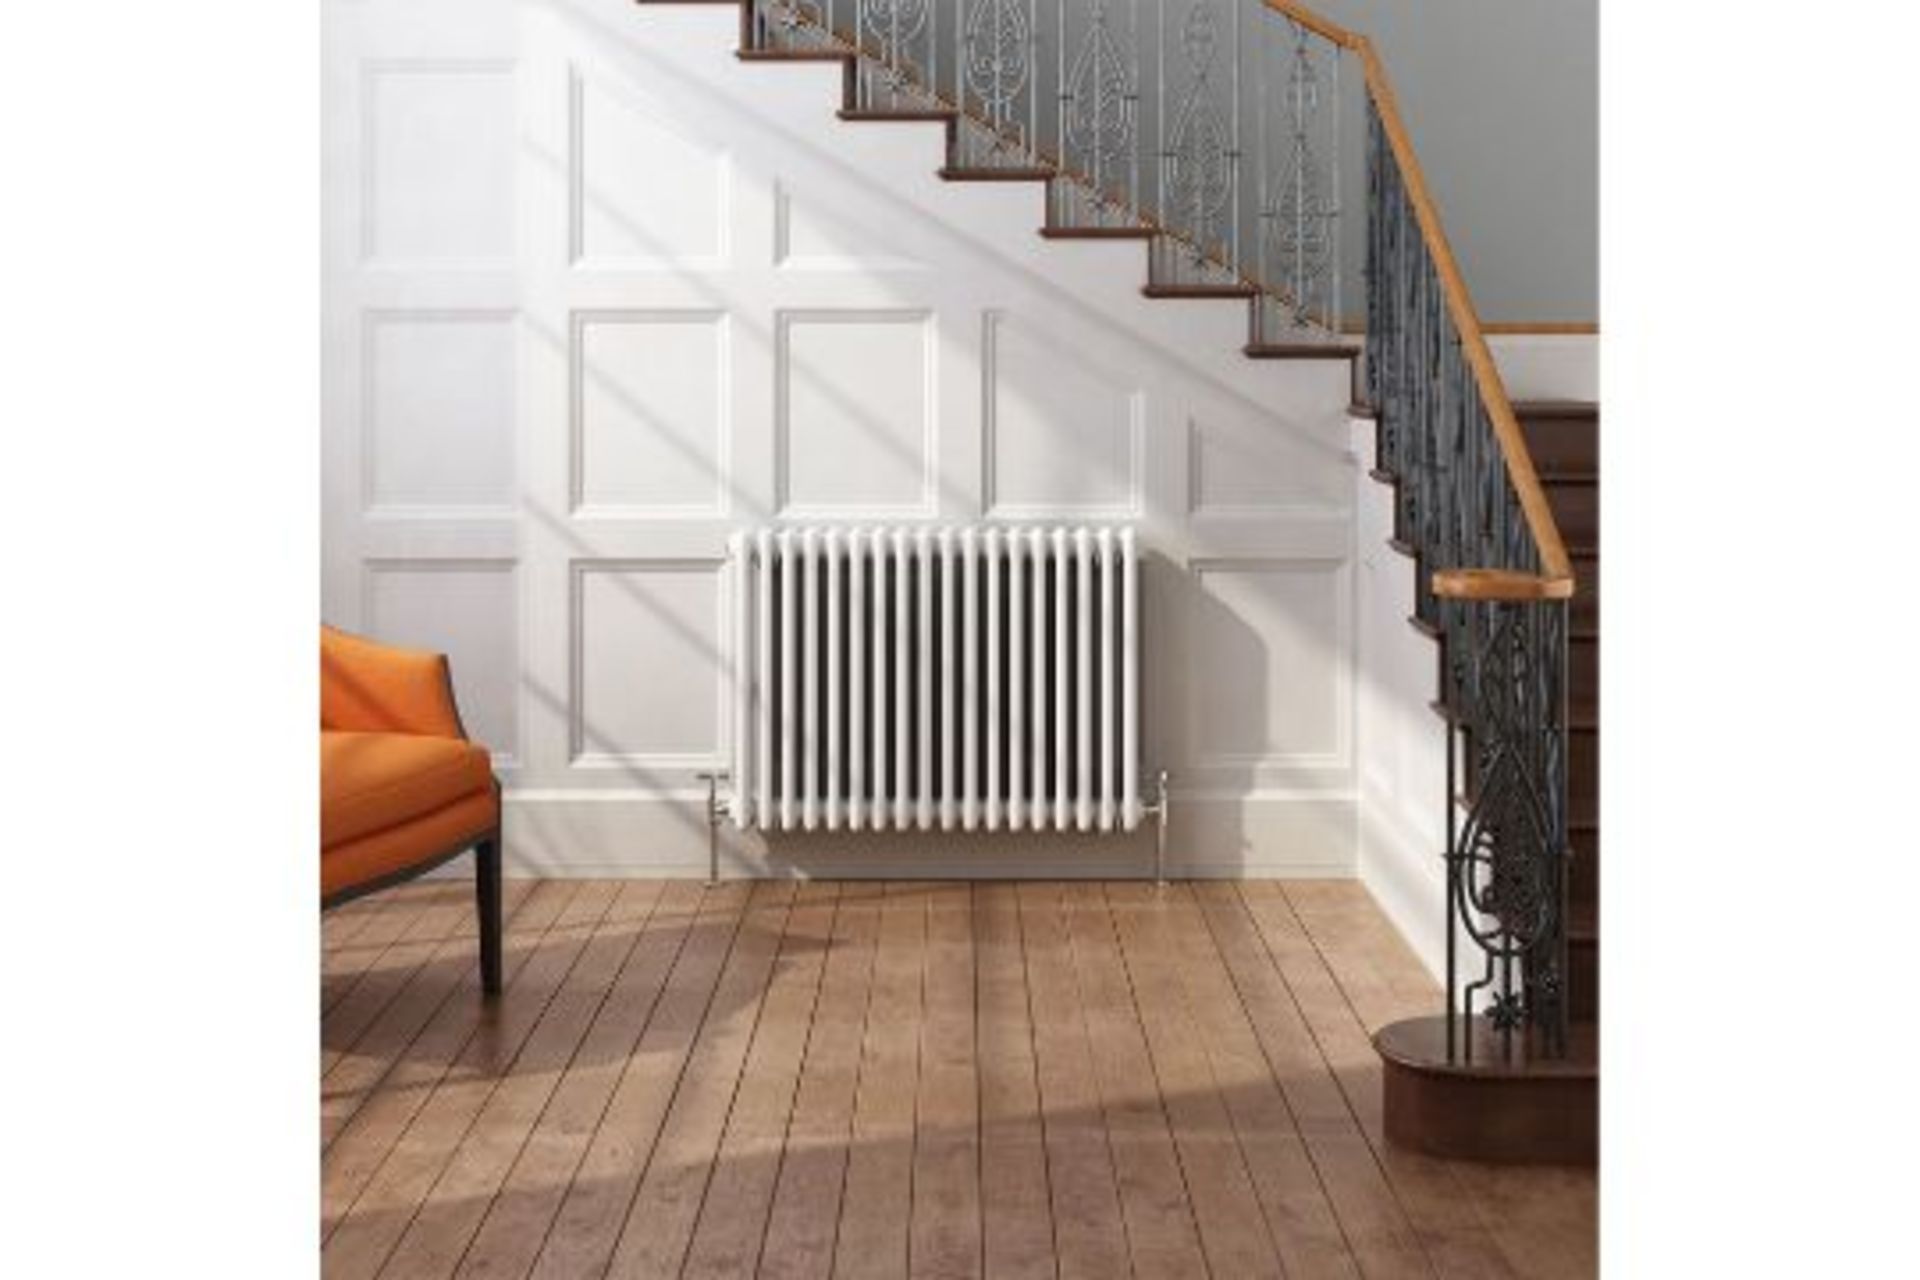 NEW (D125) 600x812mm White Double Panel Horizontal Colosseum Radiator. RRP £409.99.For an ele... - Image 2 of 2